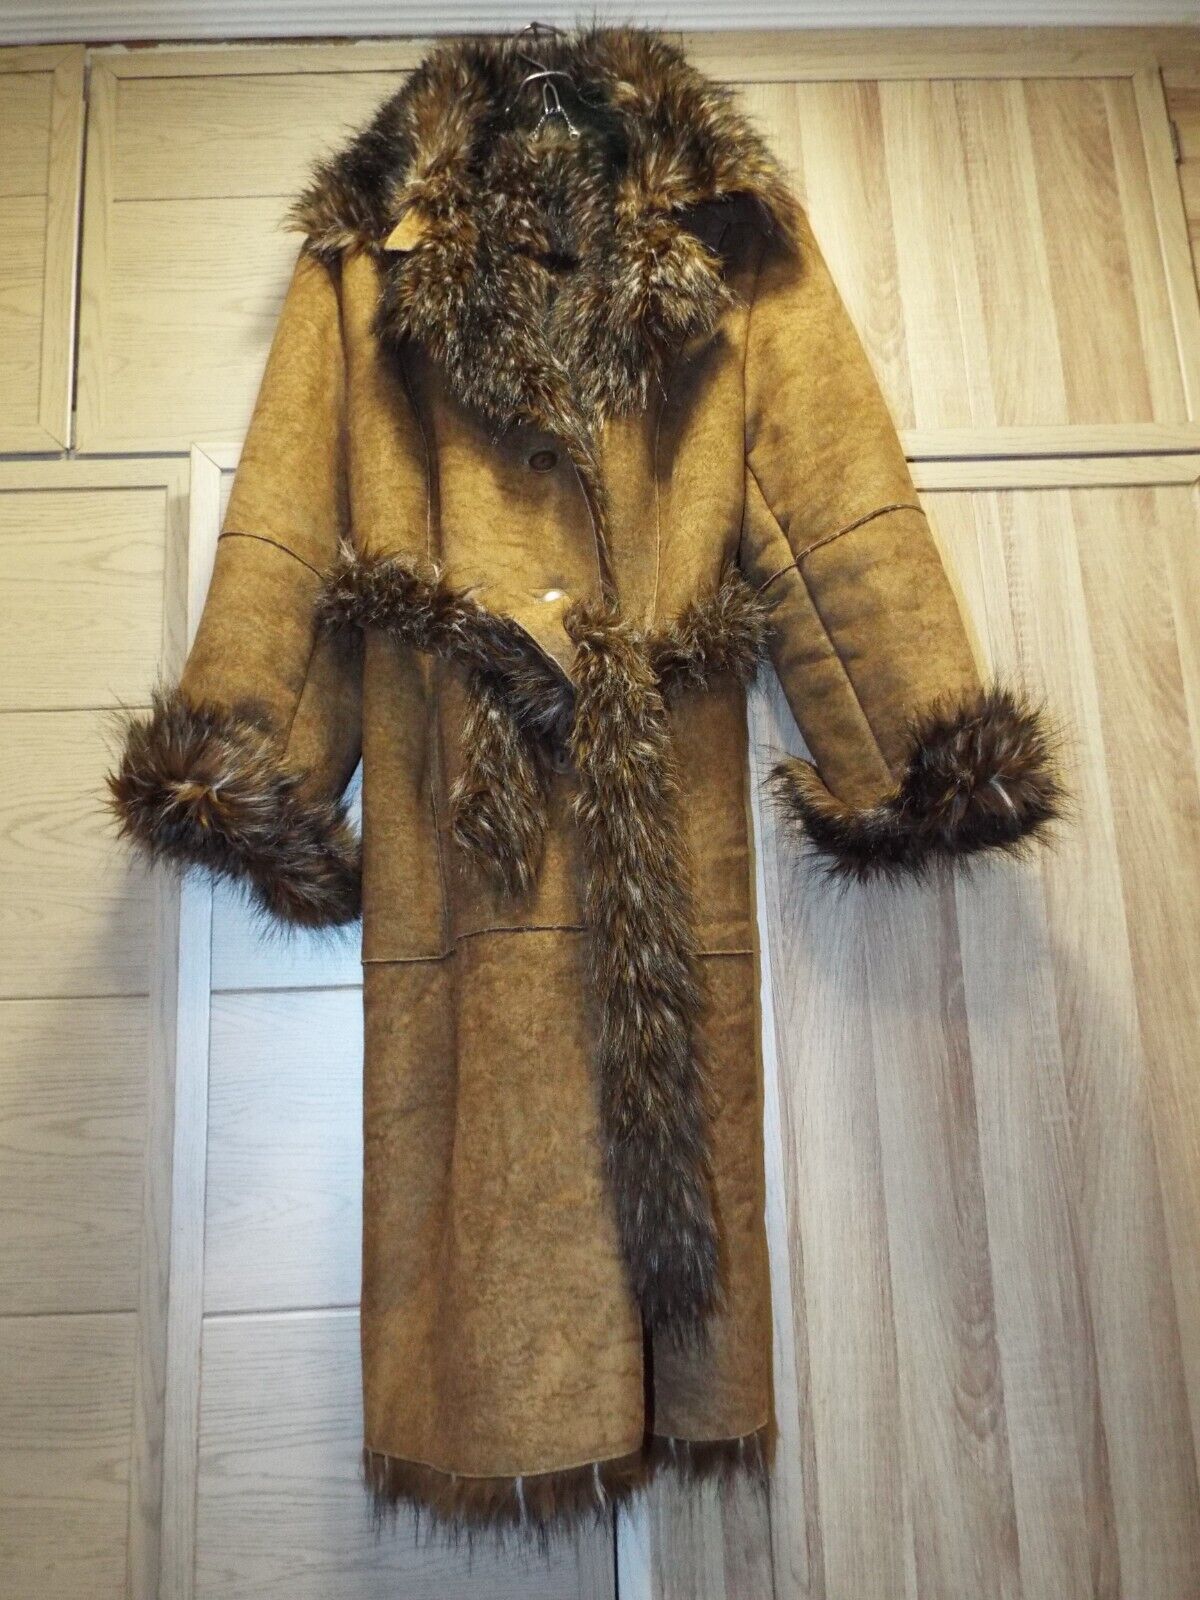 Faux fur sheepskin coat made at the beginning of the 21st century